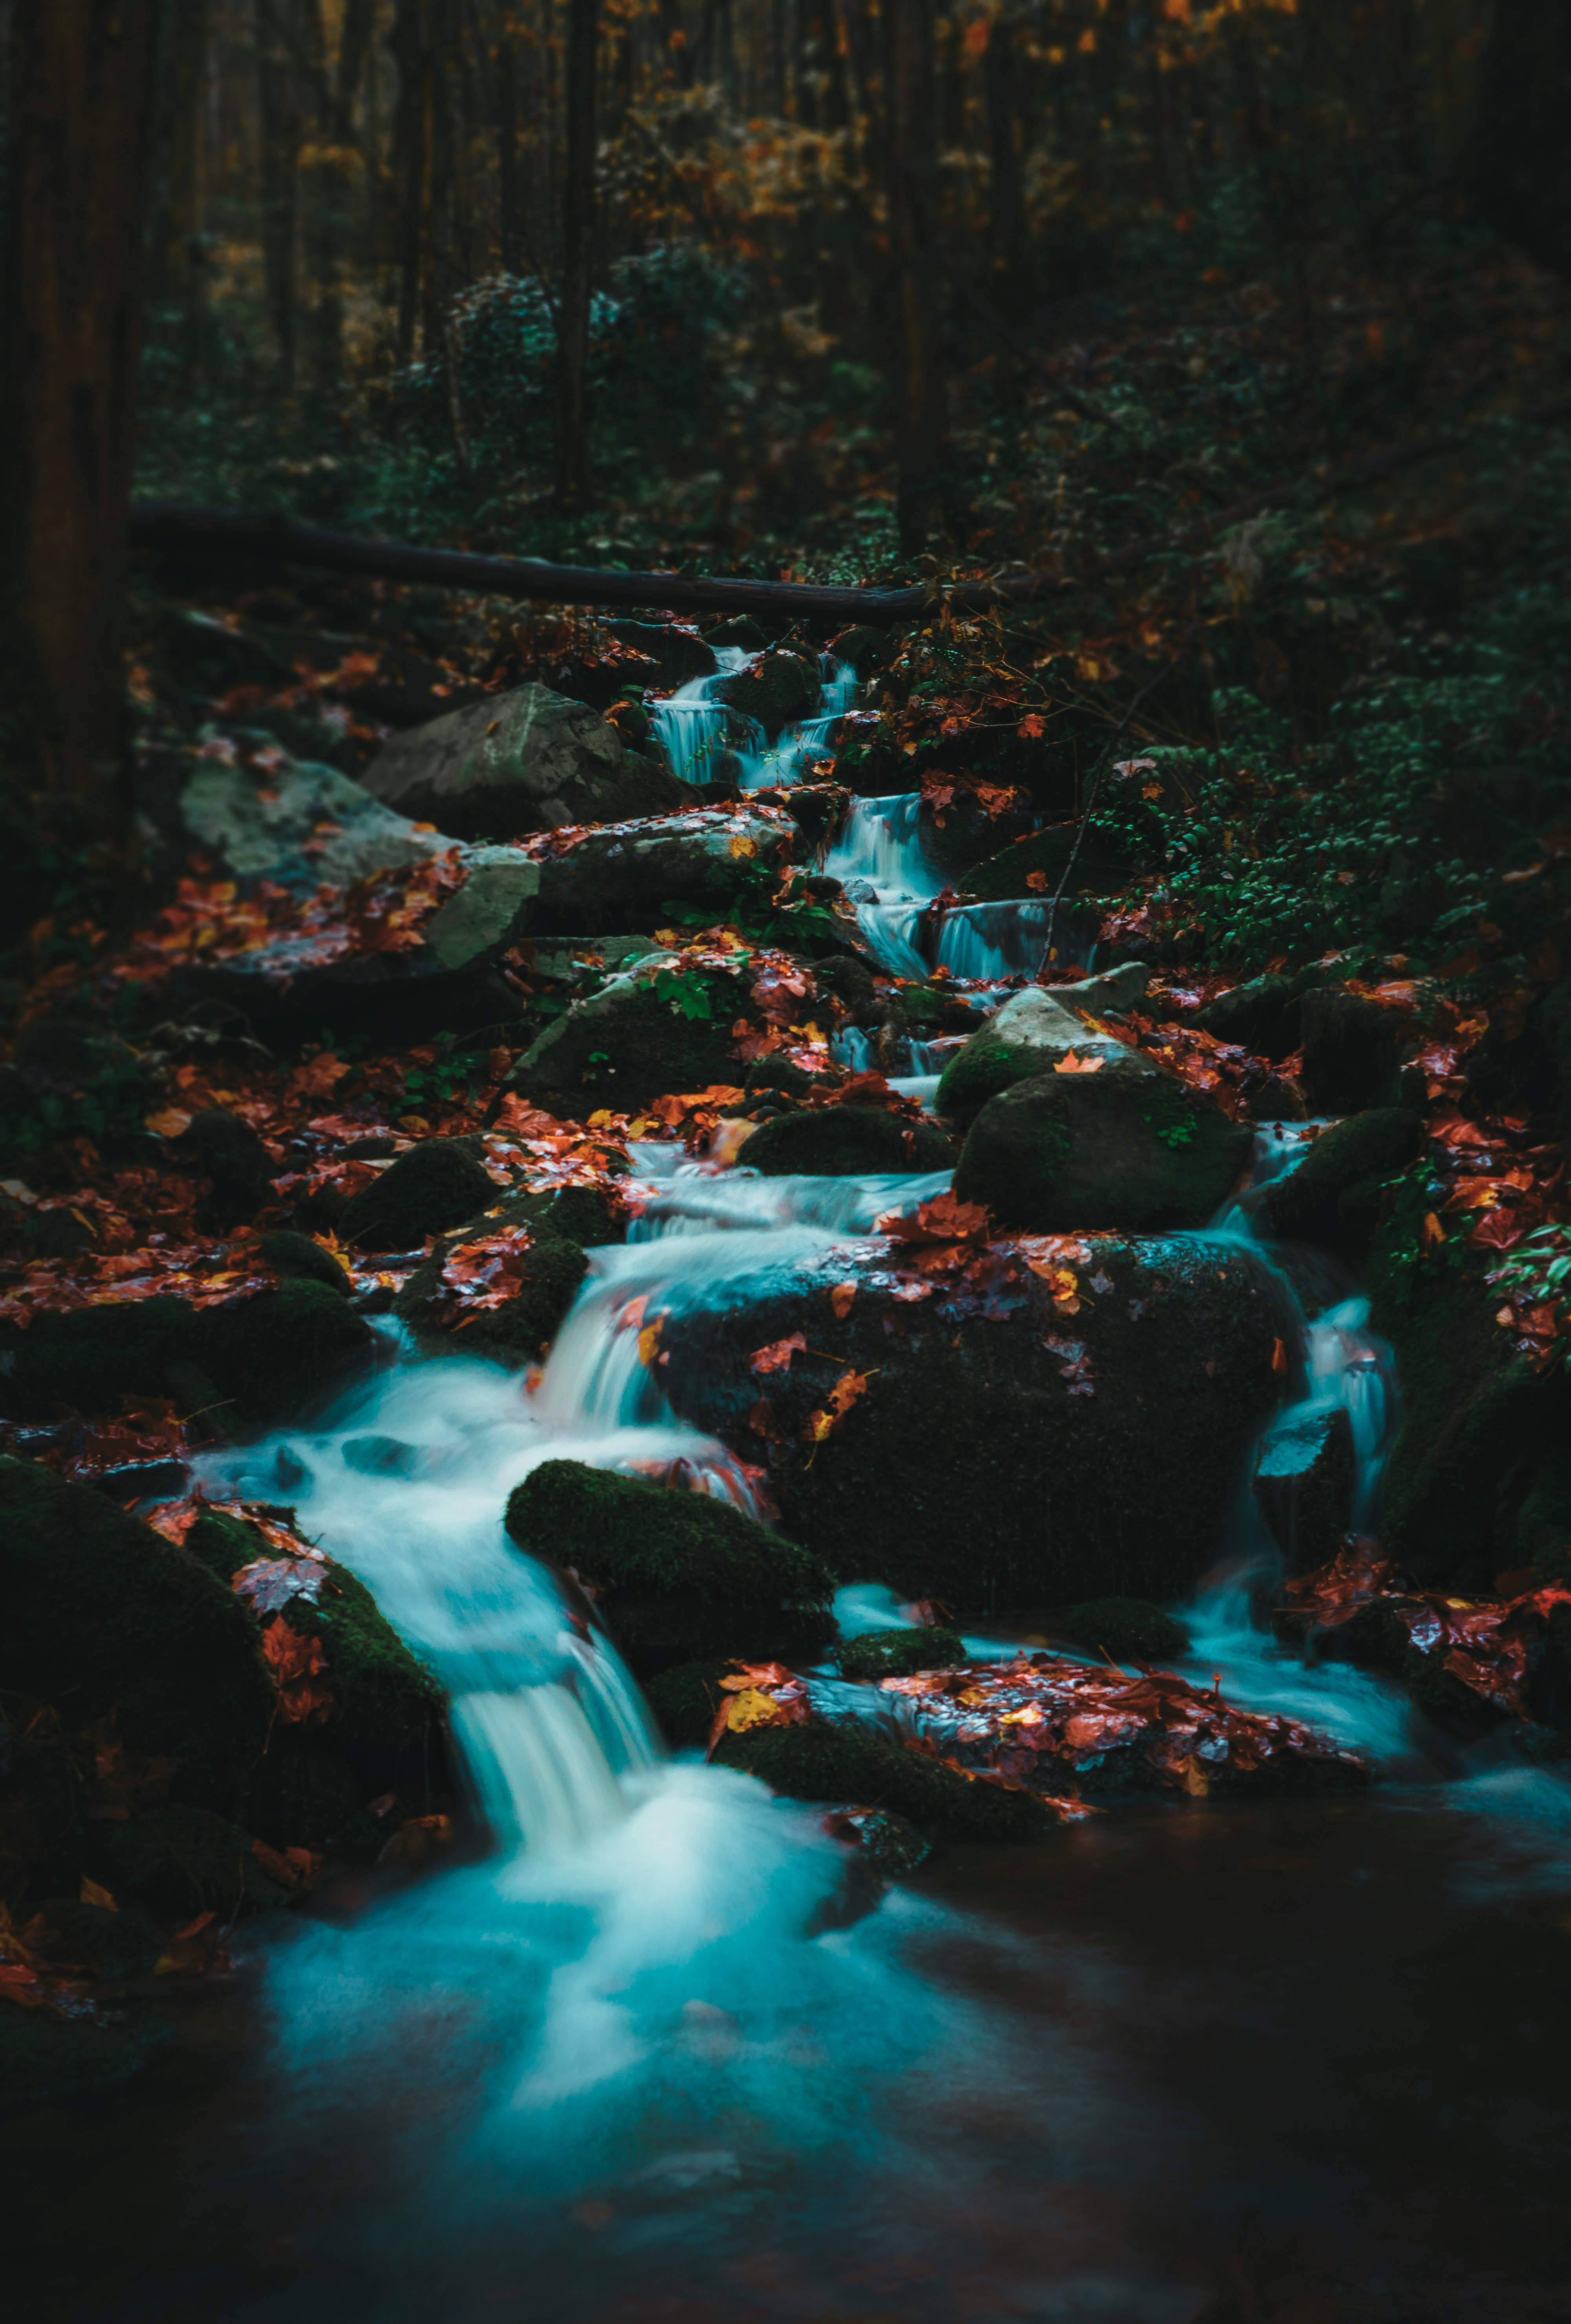 water flowing on rocks in forest during daytime